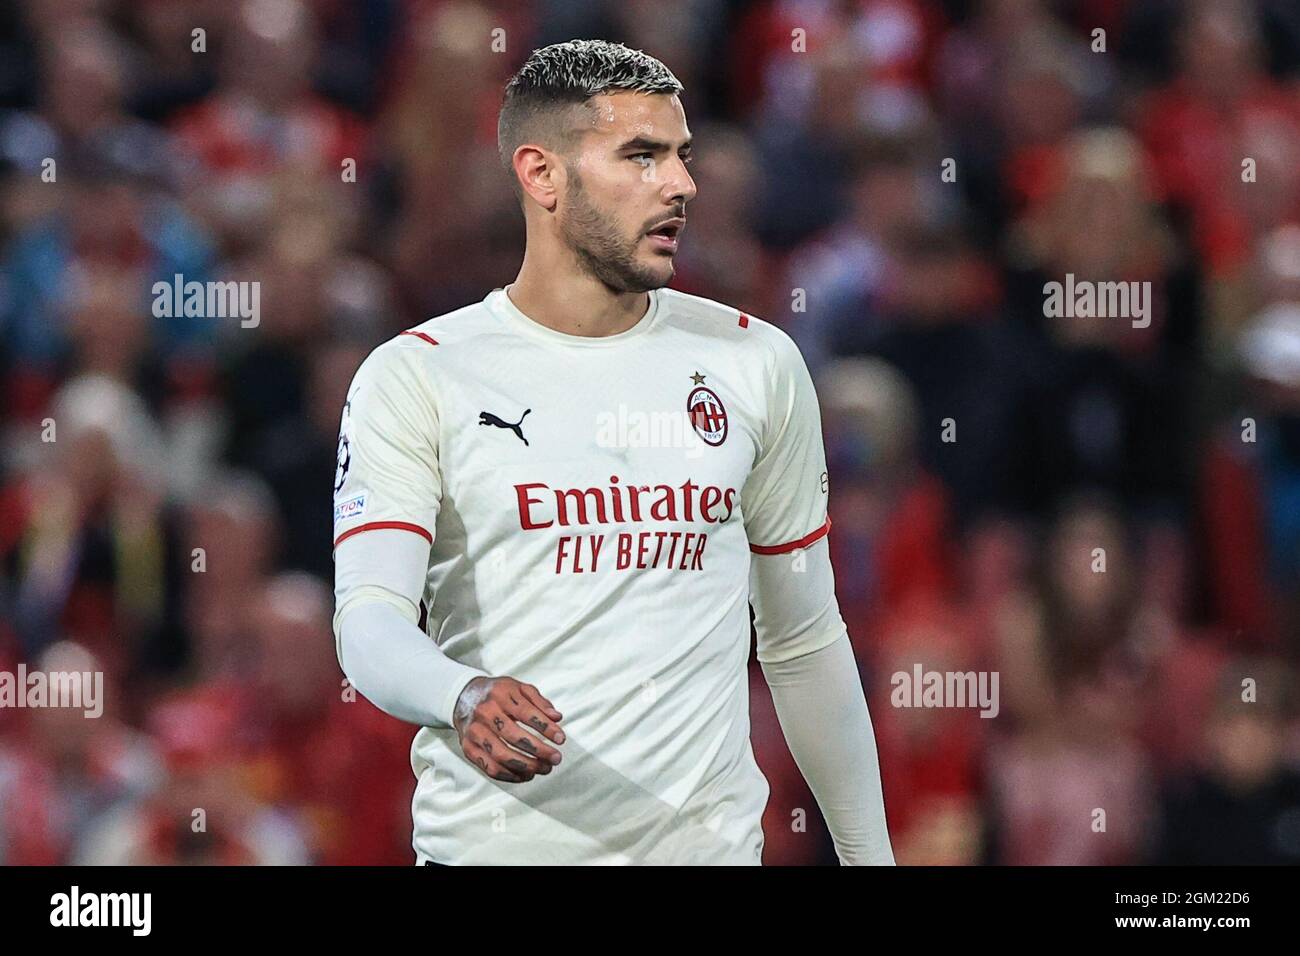 Liverpool, UK. 15th Sep, 2021. Theo Hernandez #19 of AC Milan during the game in Liverpool, United Kingdom on 9/15/2021. (Photo by Mark Cosgrove/News Images/Sipa USA) Credit: Sipa USA/Alamy Live News Stock Photo